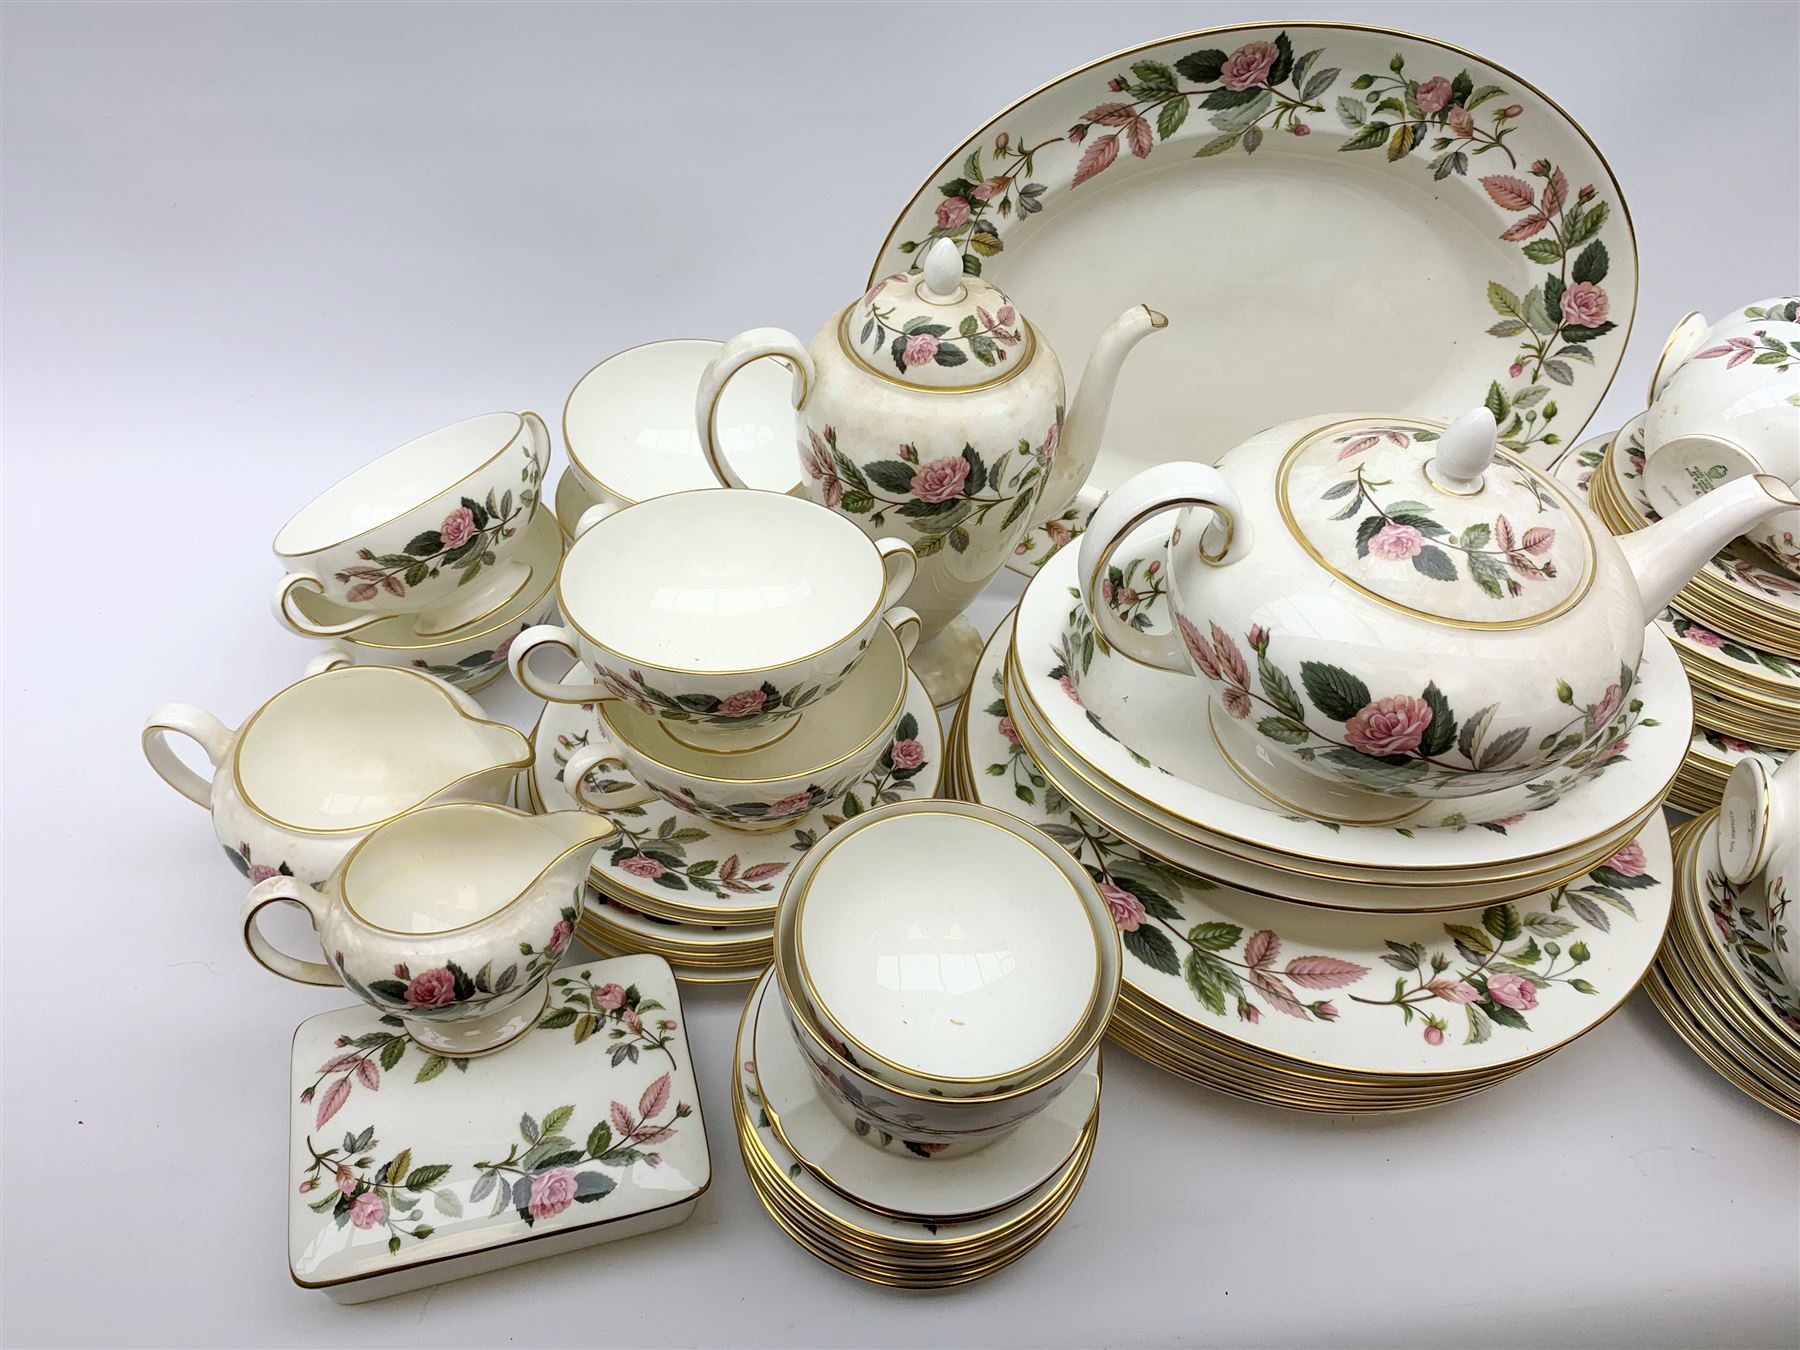 Wedgwood Hathaway Rose pattern dinner and tea wares - Image 4 of 4